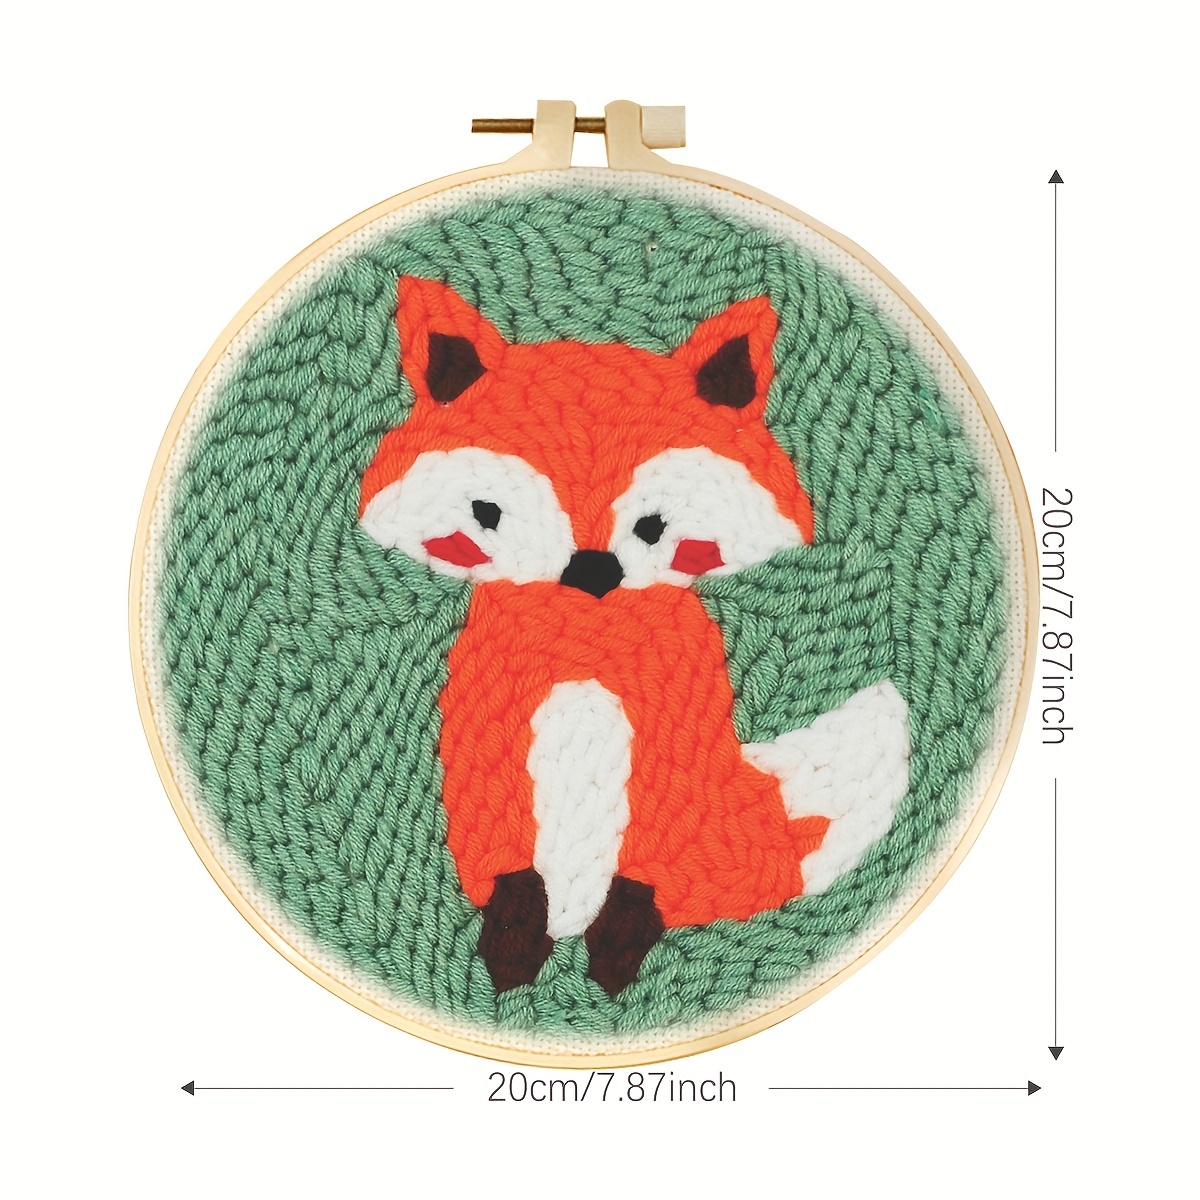 How to Embroider a Fox with Punch Needle 